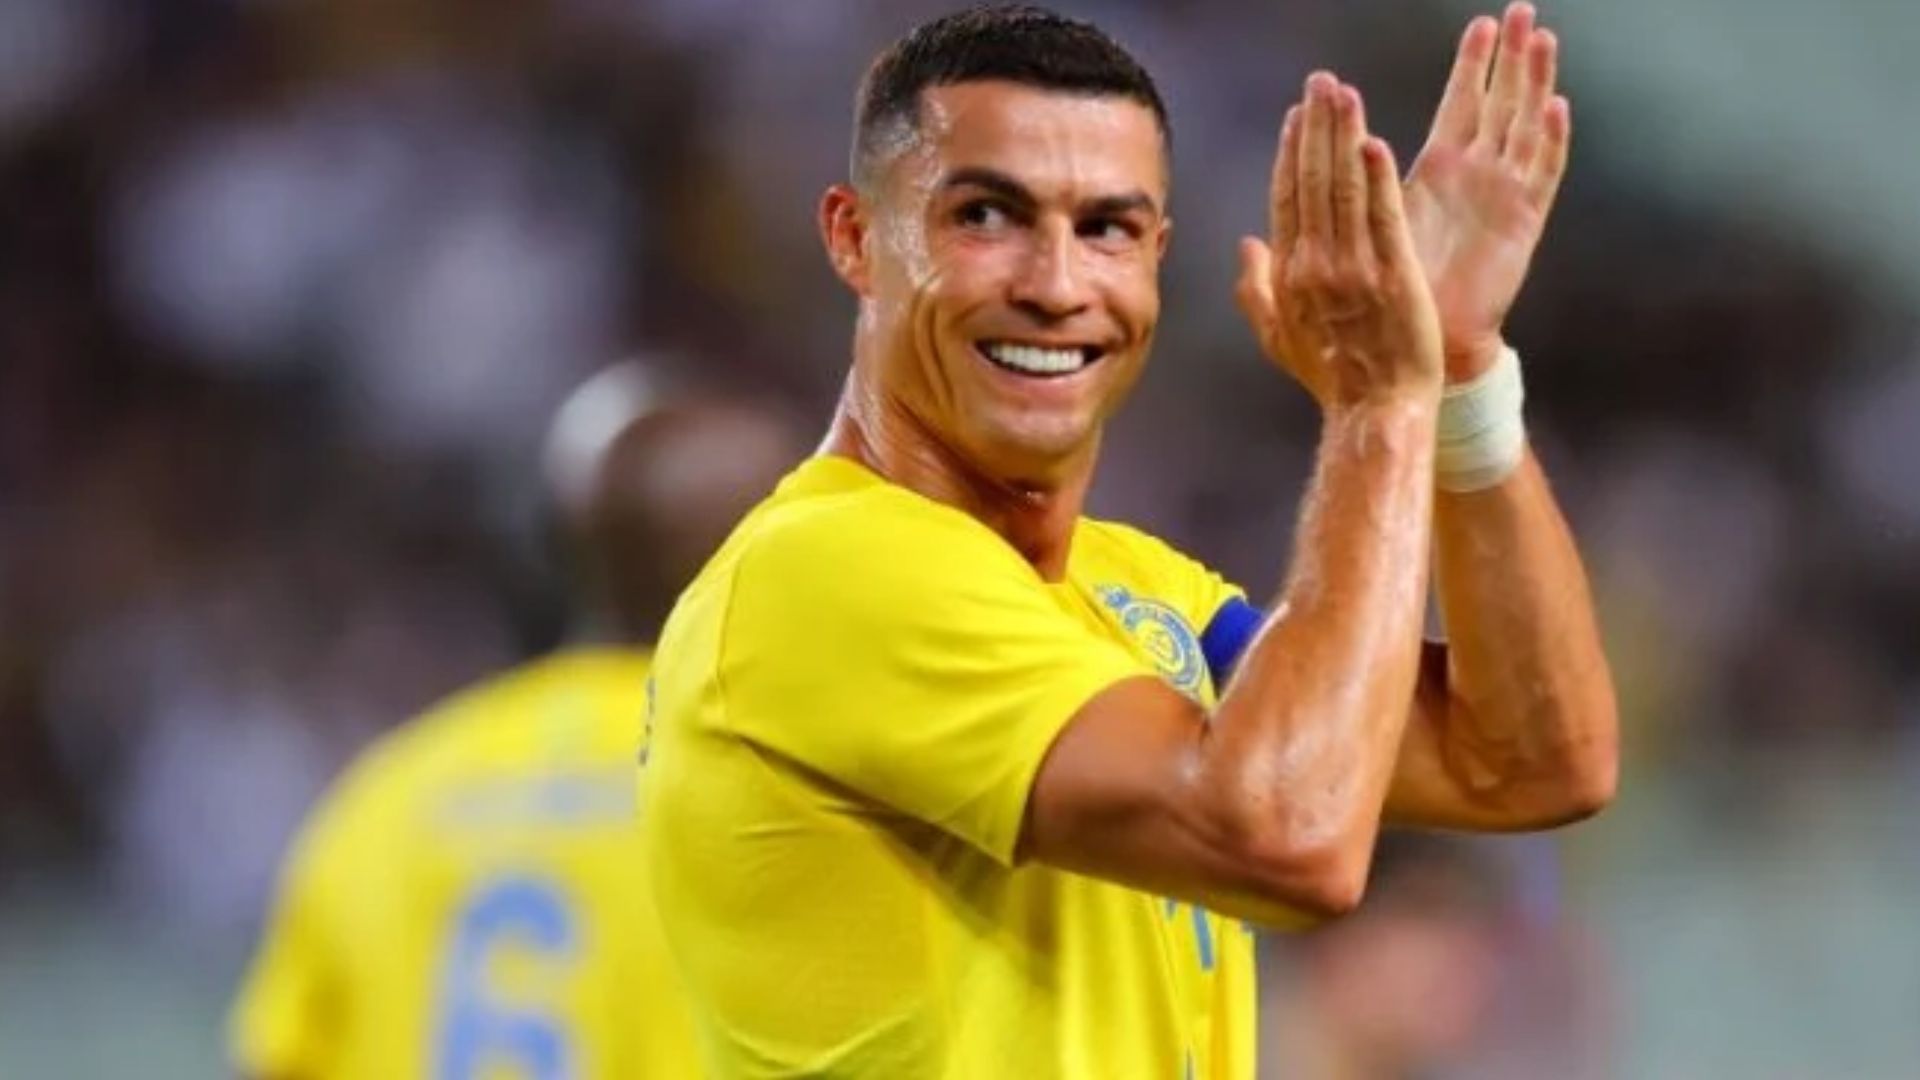 Ronaldo’s Remarkable Gesture After Penalty Awarded, Amazes the Internet – Must See Video